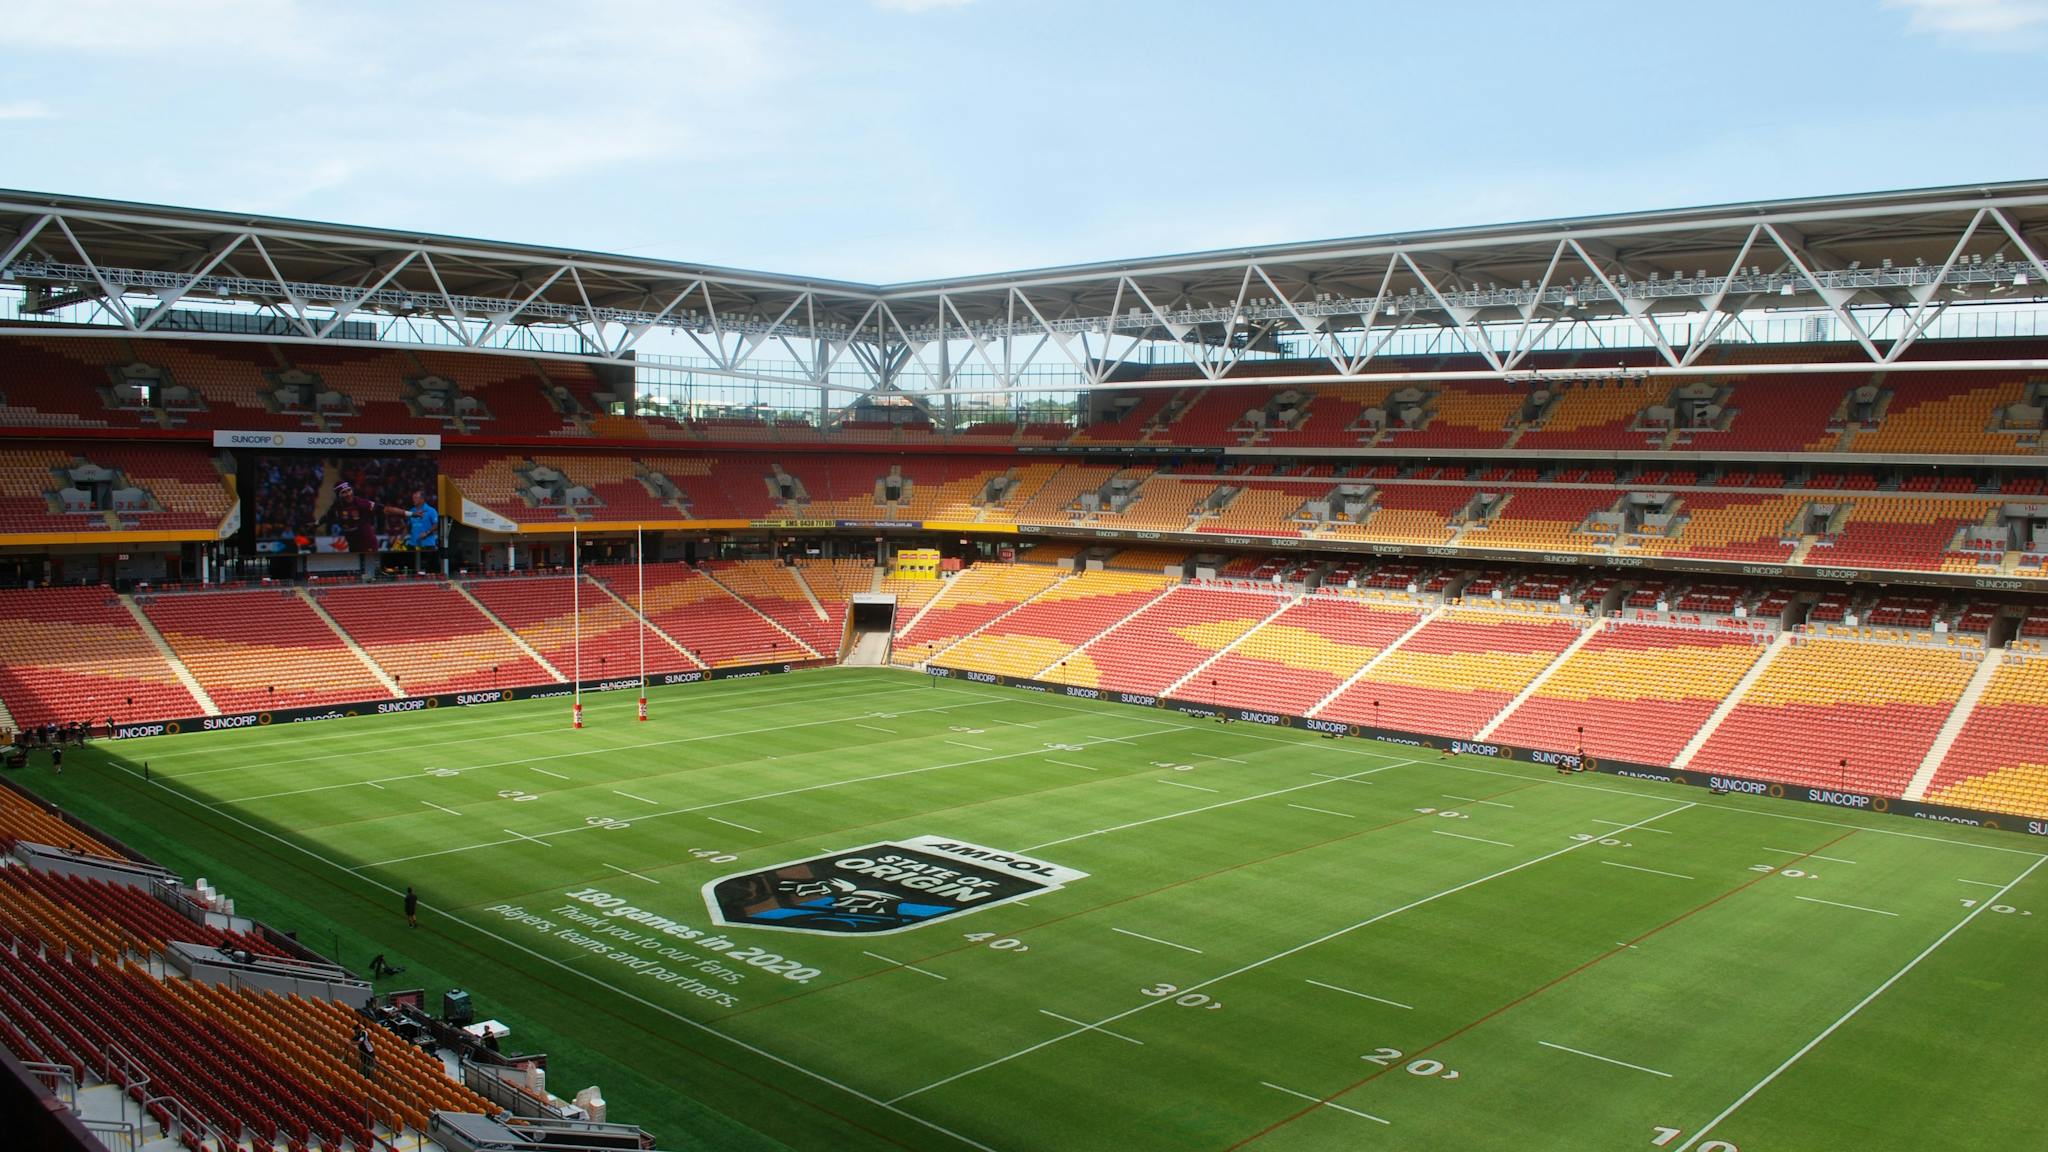 An image of the Suncorp Stadium field setup for the 2020 State of Origin